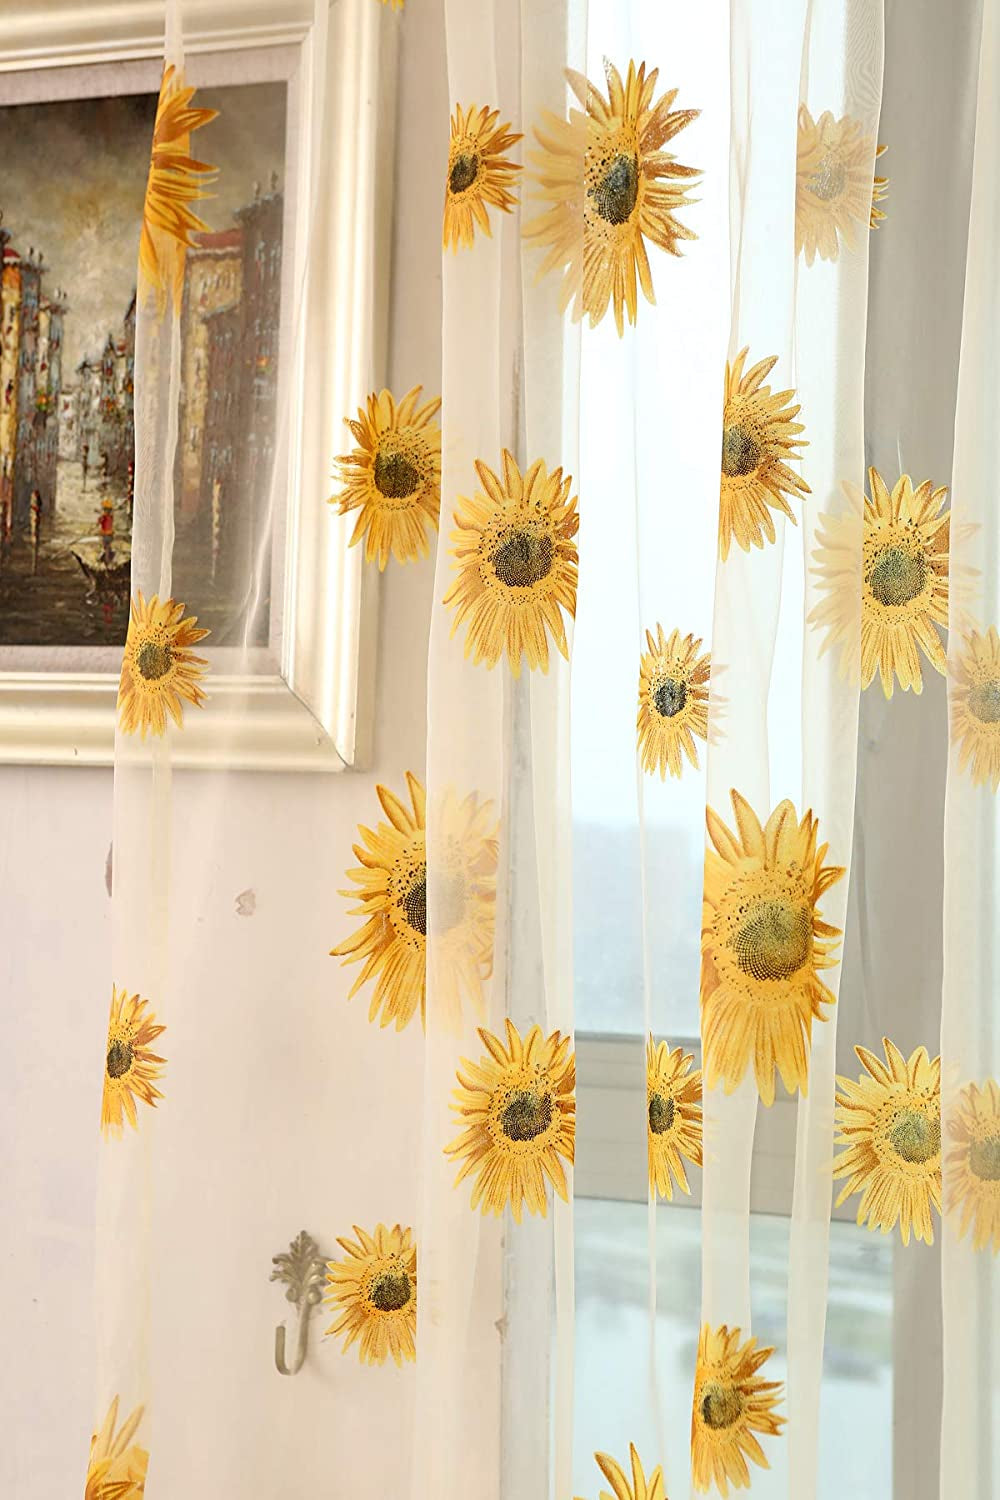 2PCS Sunflower Curtains Kitchen Decor Yellow Sheer Curtains for Small Window Voile Room Scarf Door Bed Drape Panels for Bedroom Living Room Floral Drape Panel (Yellow)  Wirhlly   